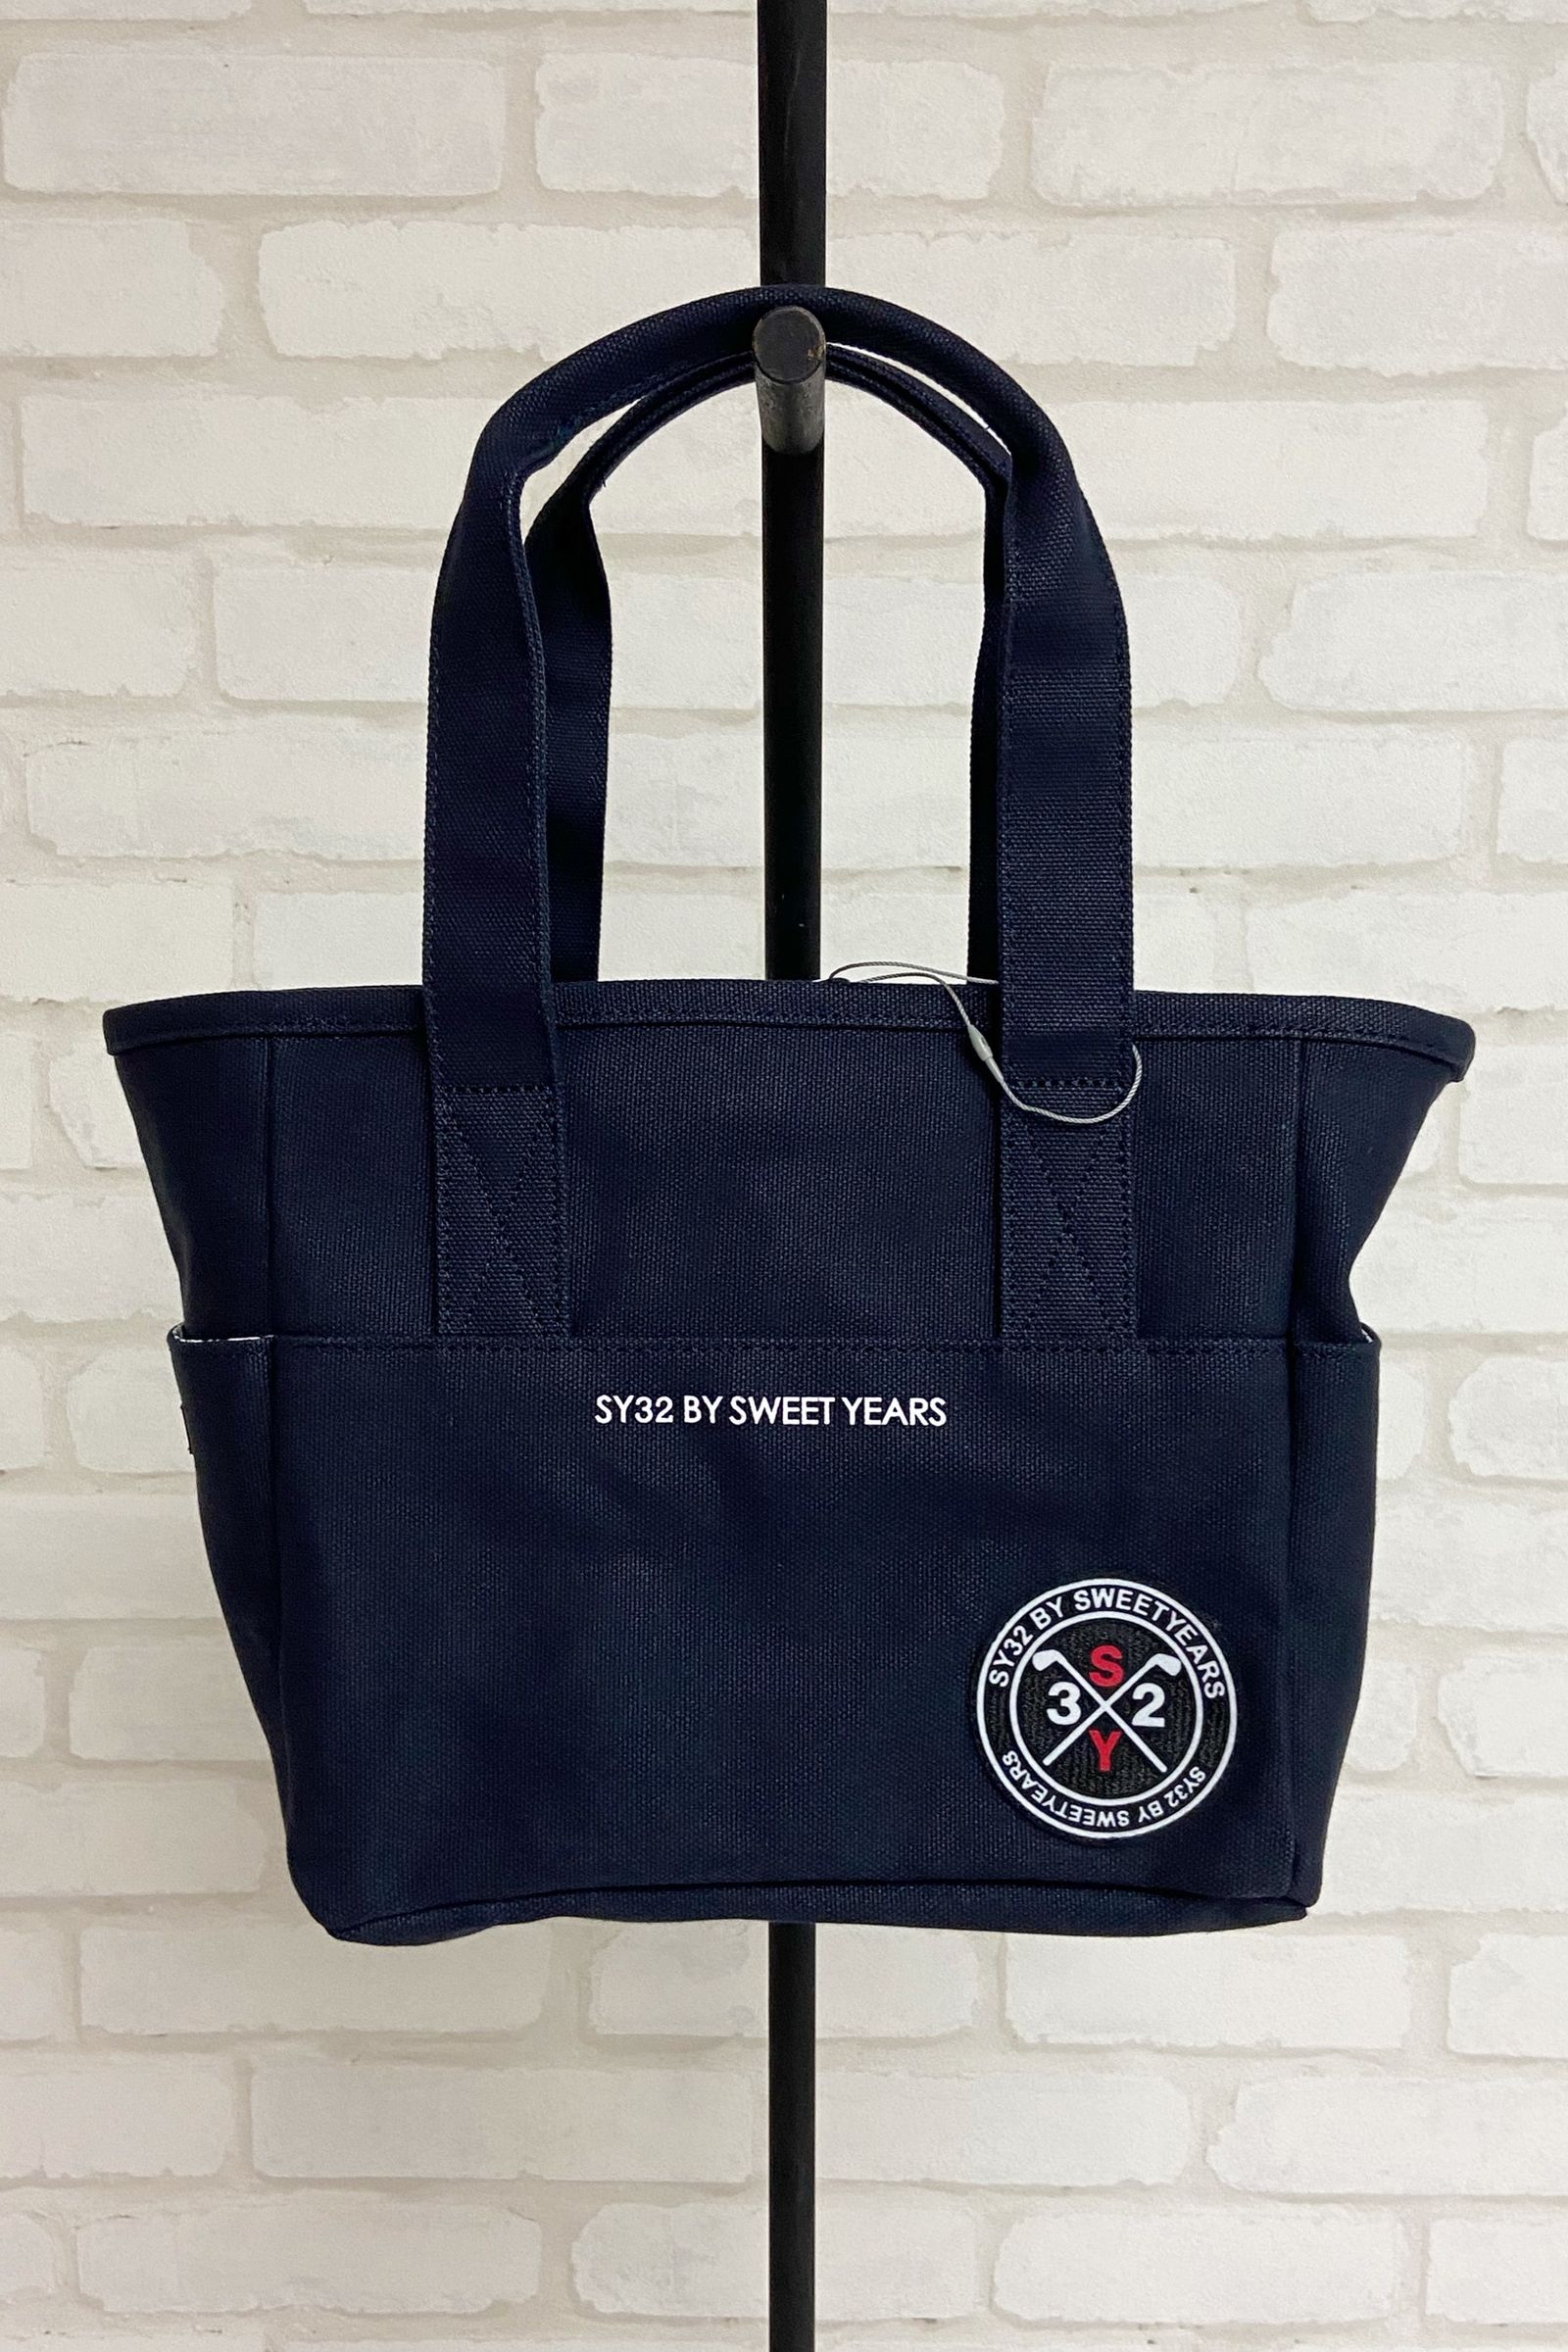 CANVAS TOTO BAG (SMALL) / NAVY 【SY32 by SWEET YEARS】 - F